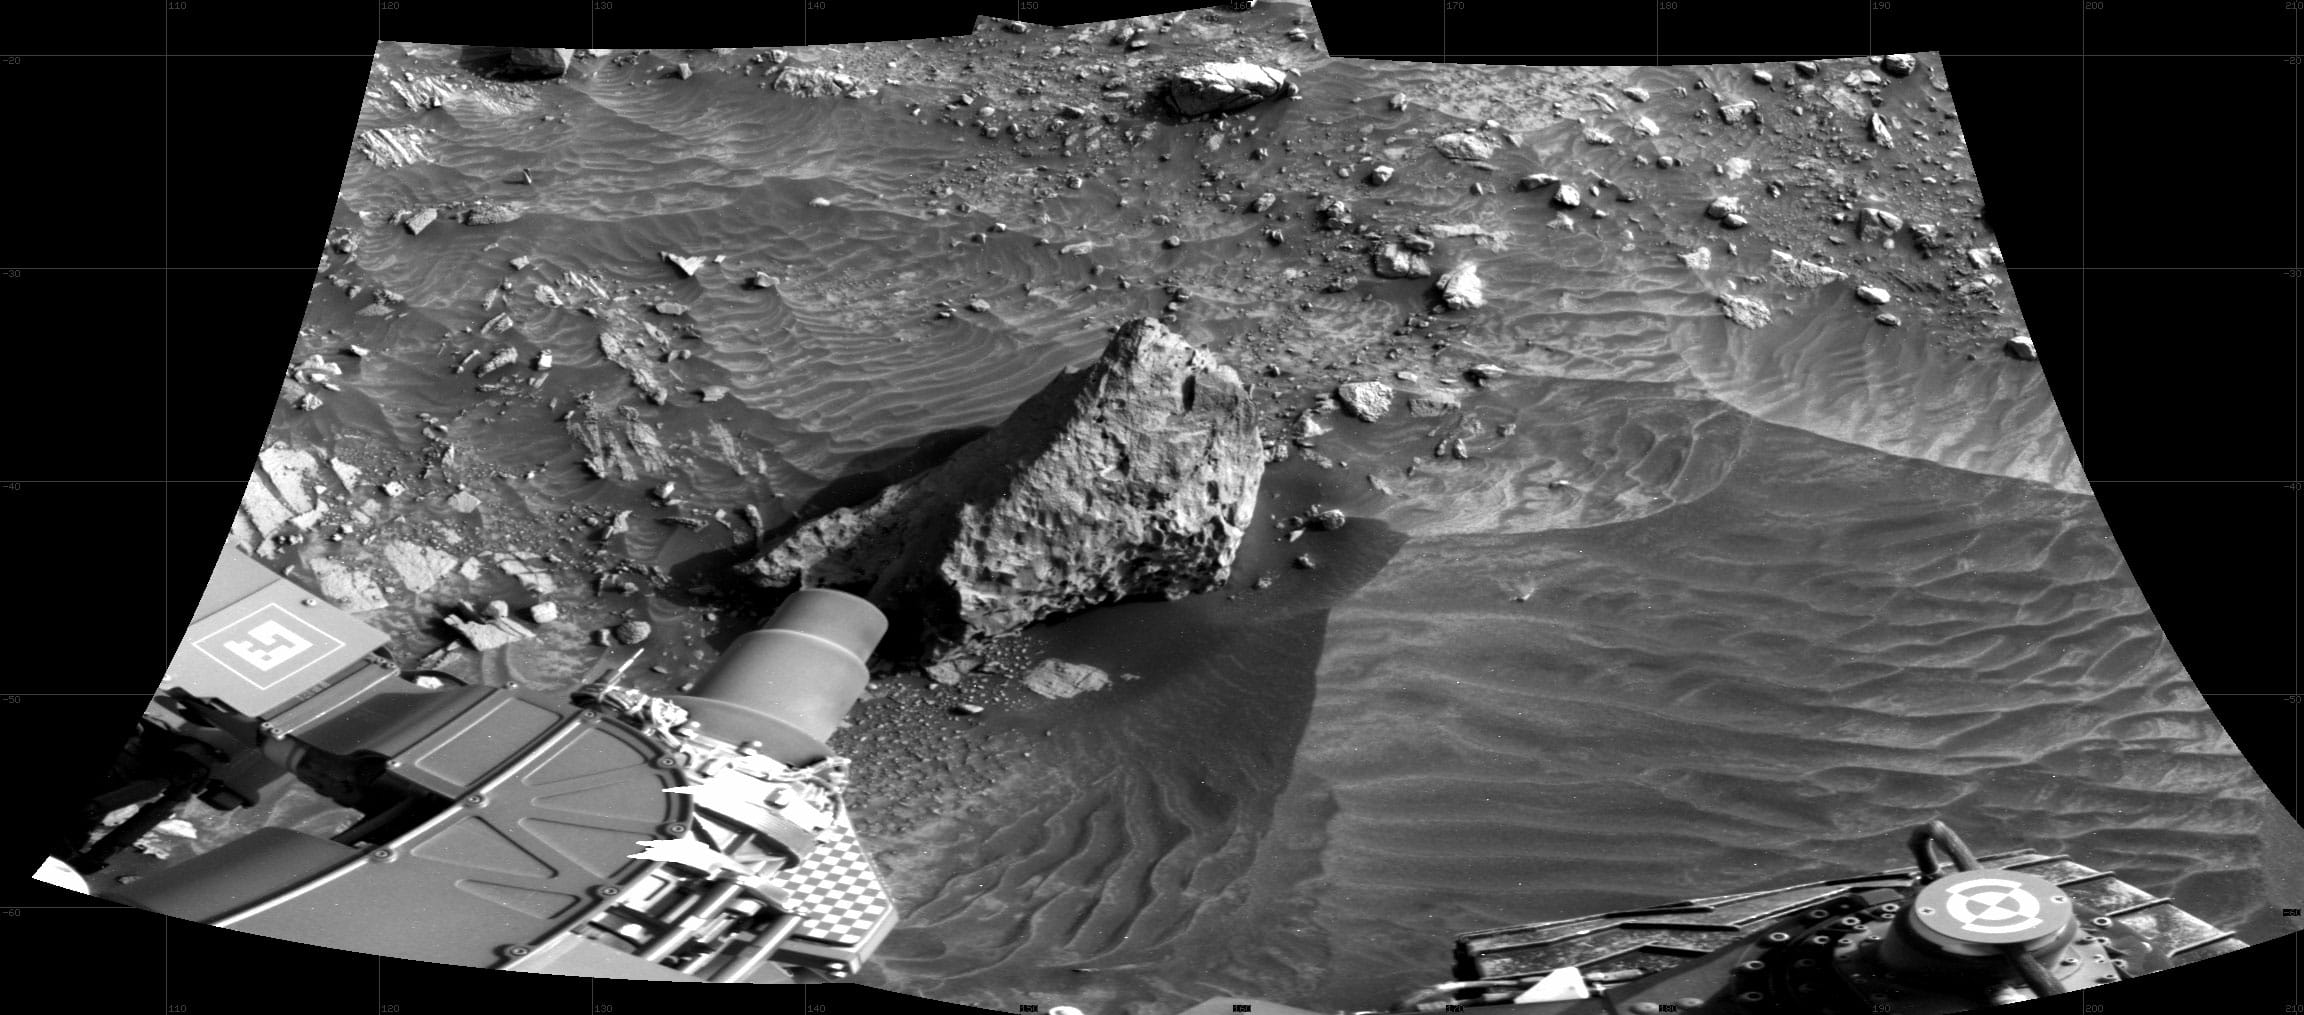 Curiosity took the images on April 26, 2024, Sol 4166 of the Mars Science Laboratory mission at drive 3182, site number 106. The local mean solar time for the image exposures was 3 PM.